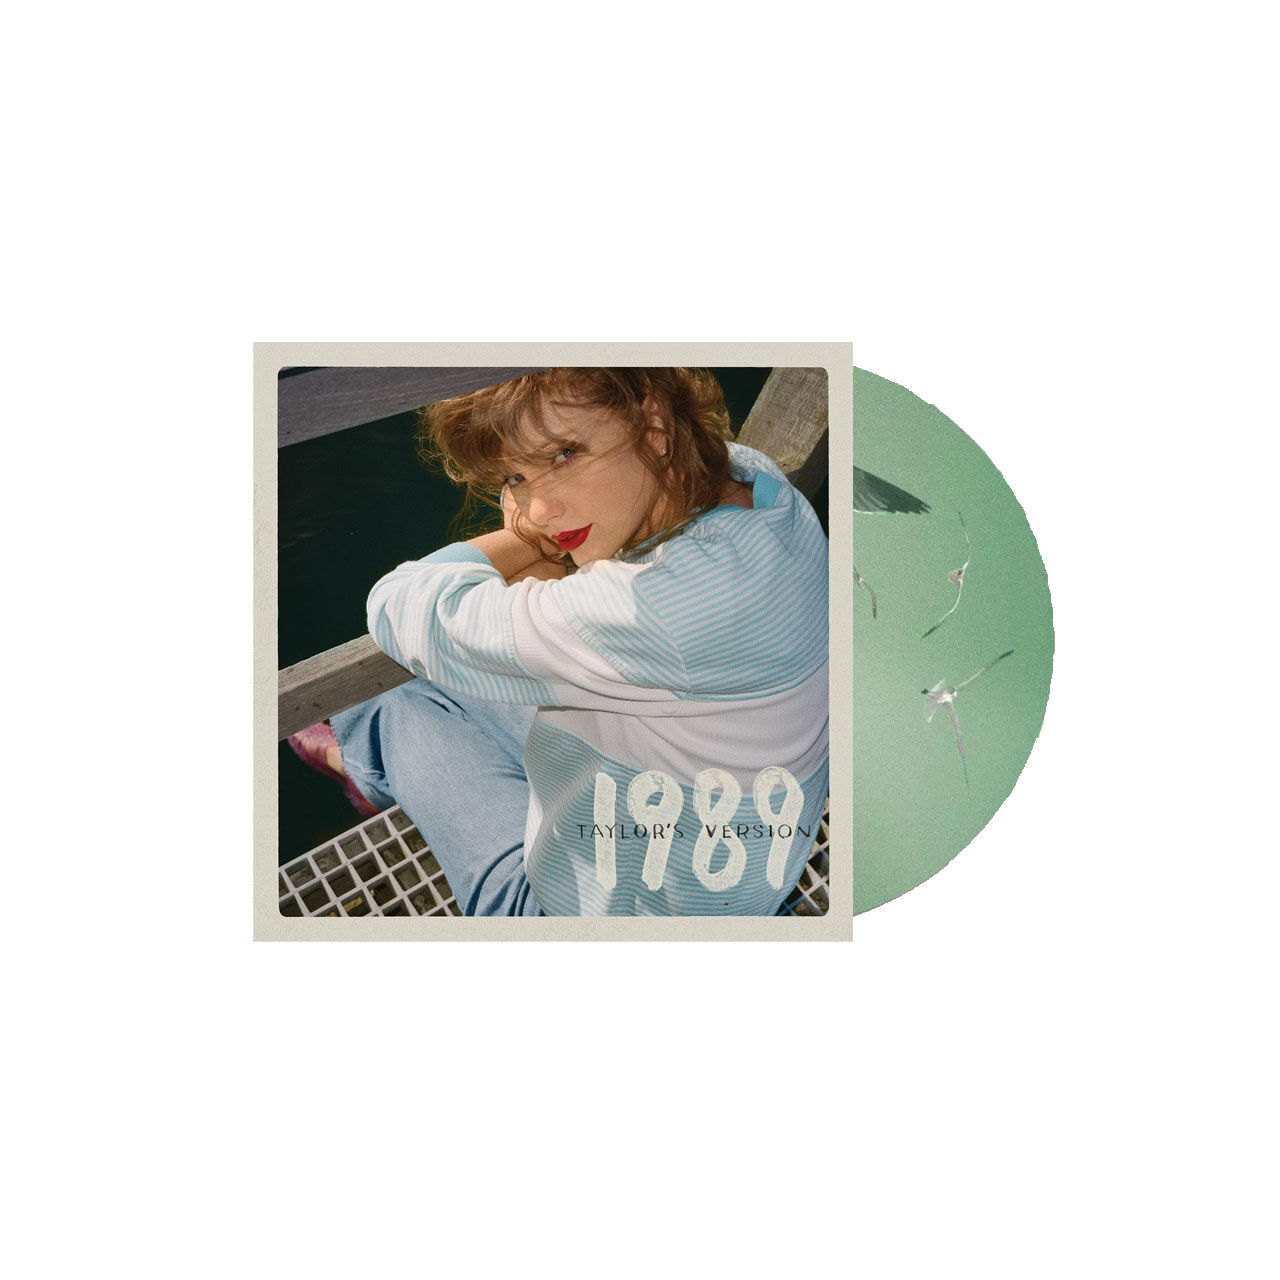 TAYLOR SWIFT 1989 (Taylor’s Version) Aquamarine Green Deluxe Jewel Case CD, Case Dent